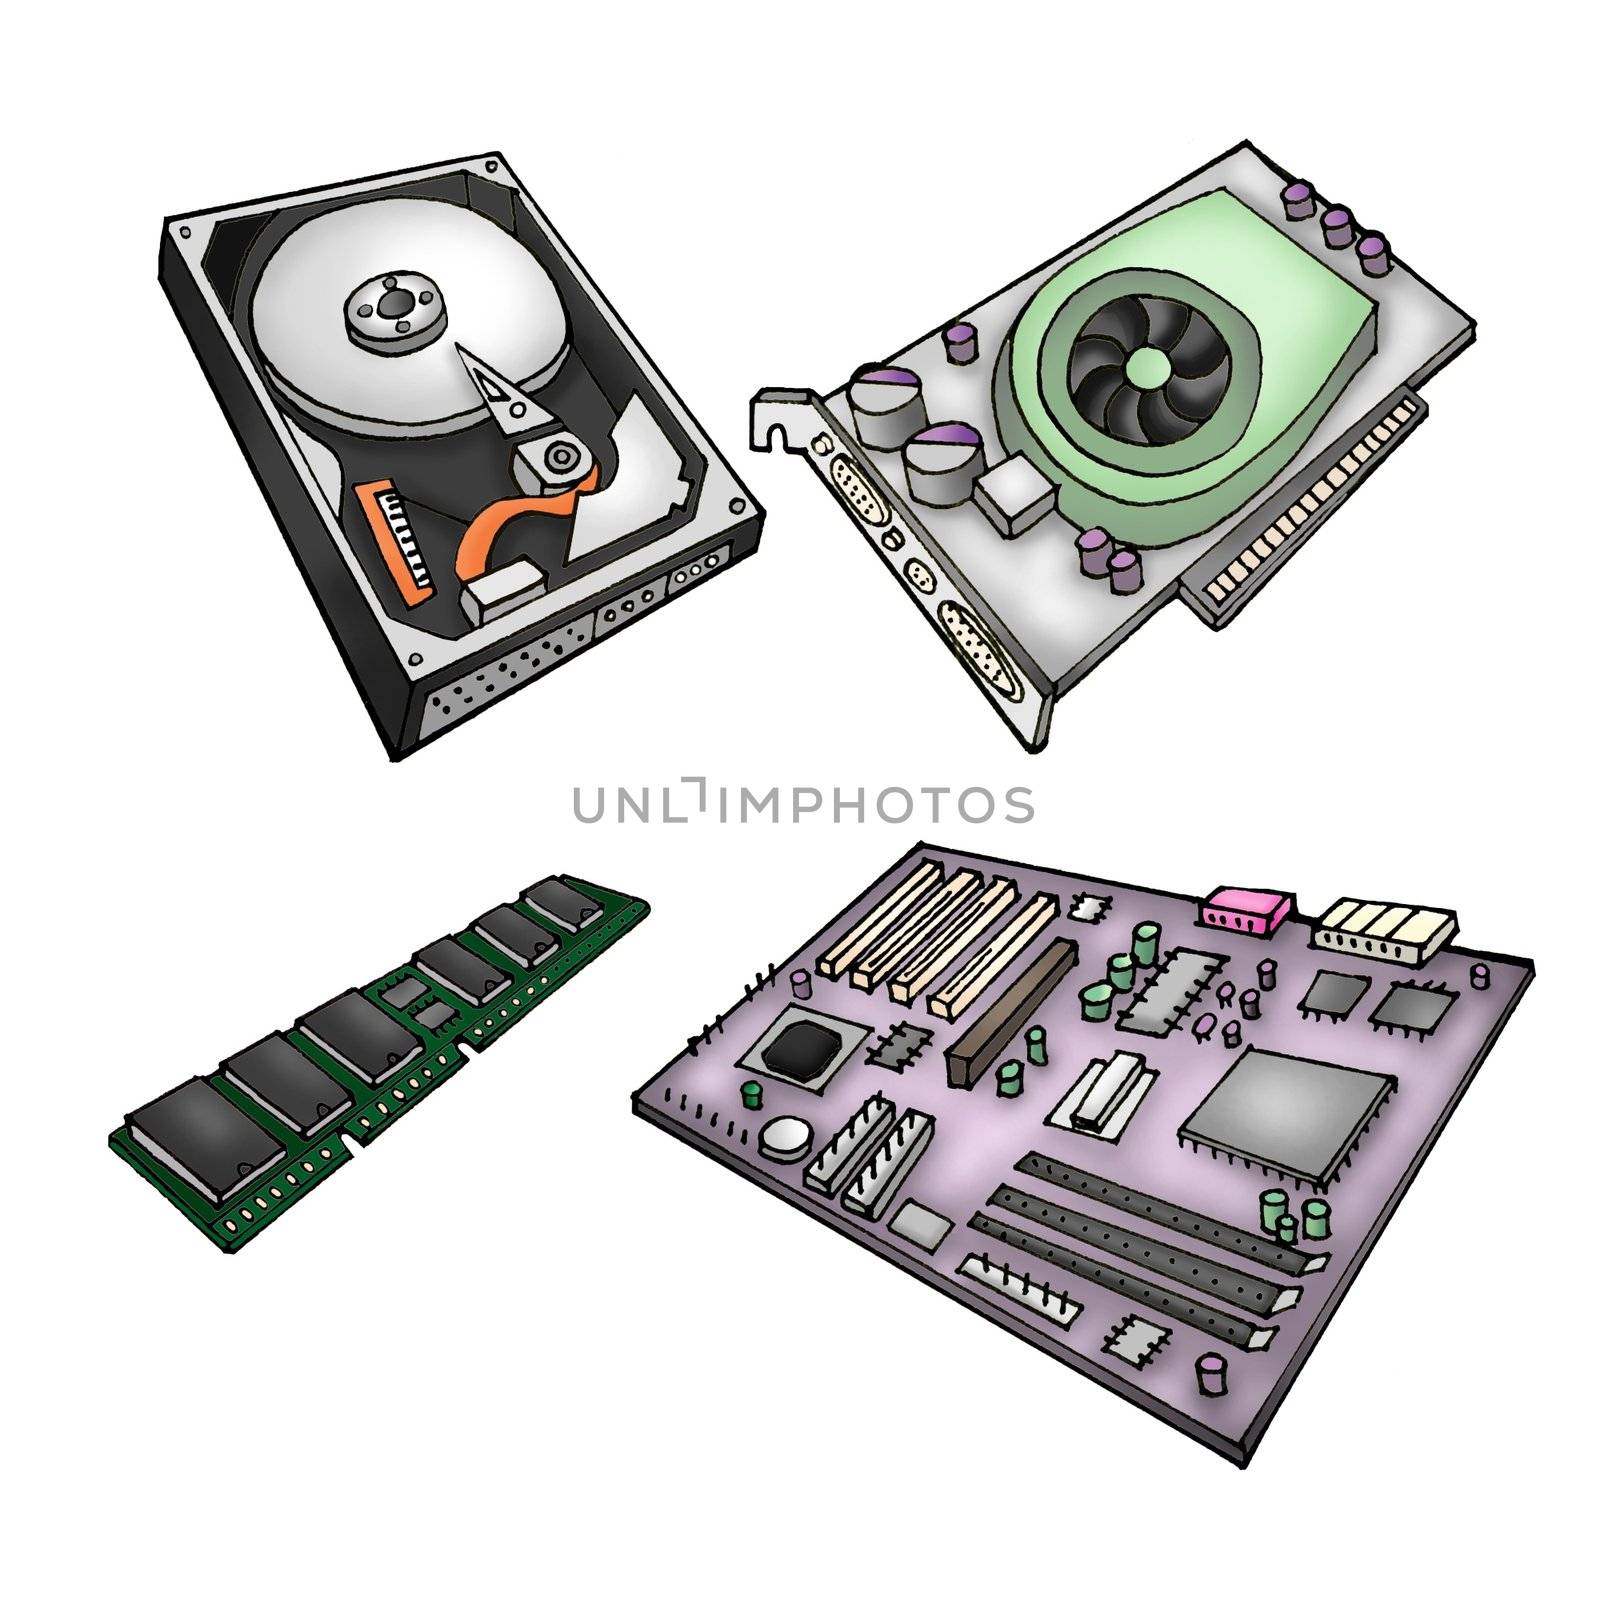 Color illustration of computer parts - harddrive, graphics card, memory module, motherboard.